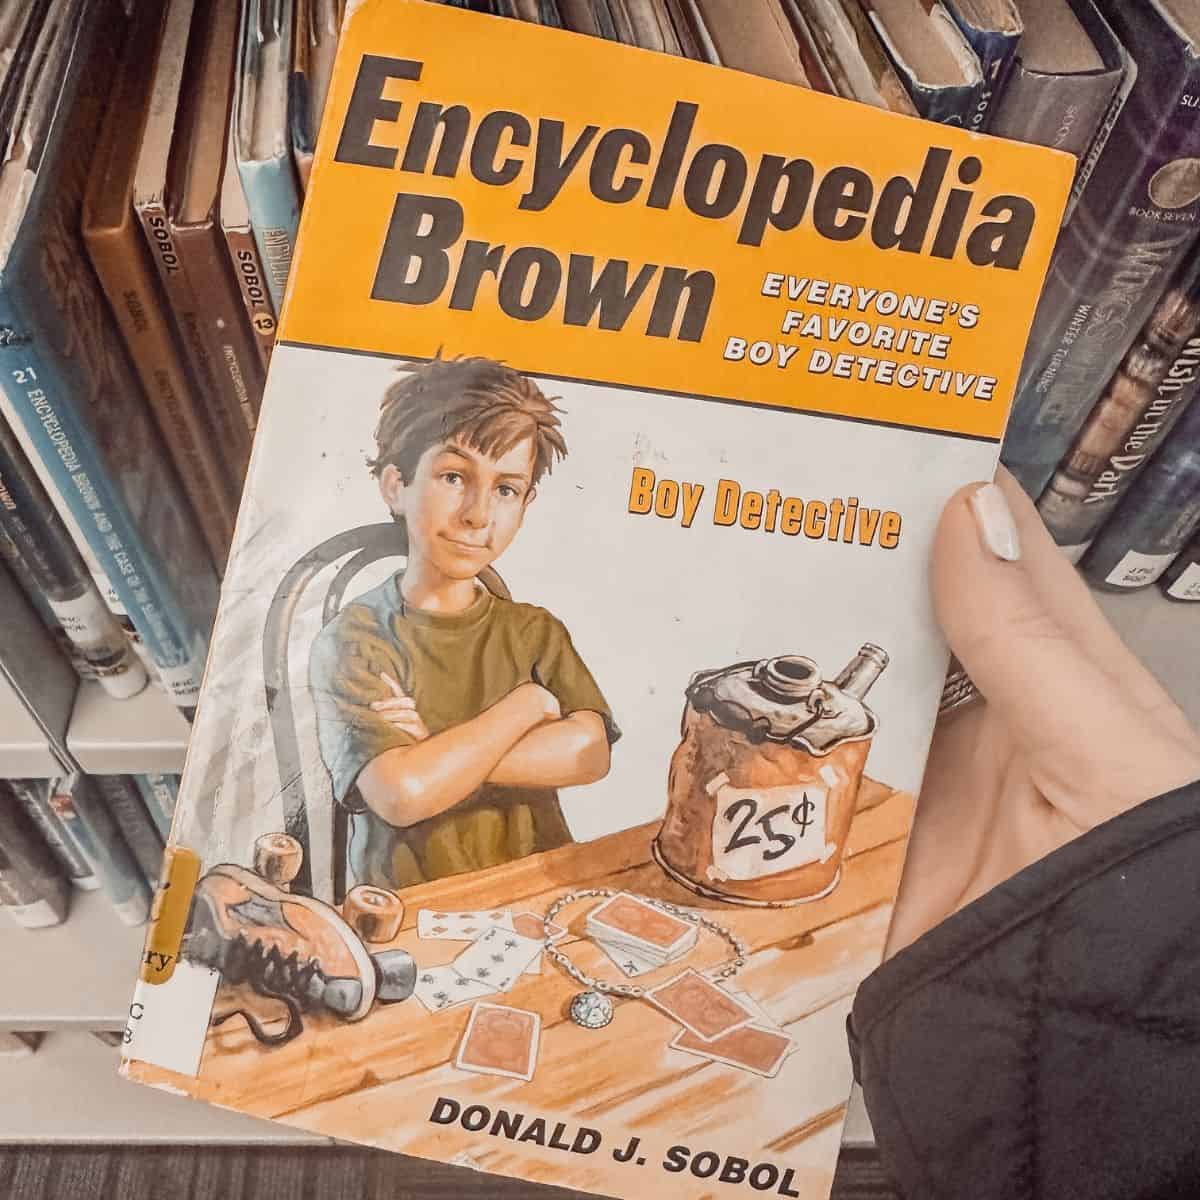 encyclopedia brown by donald j. sobol held in front of a bookshelf.